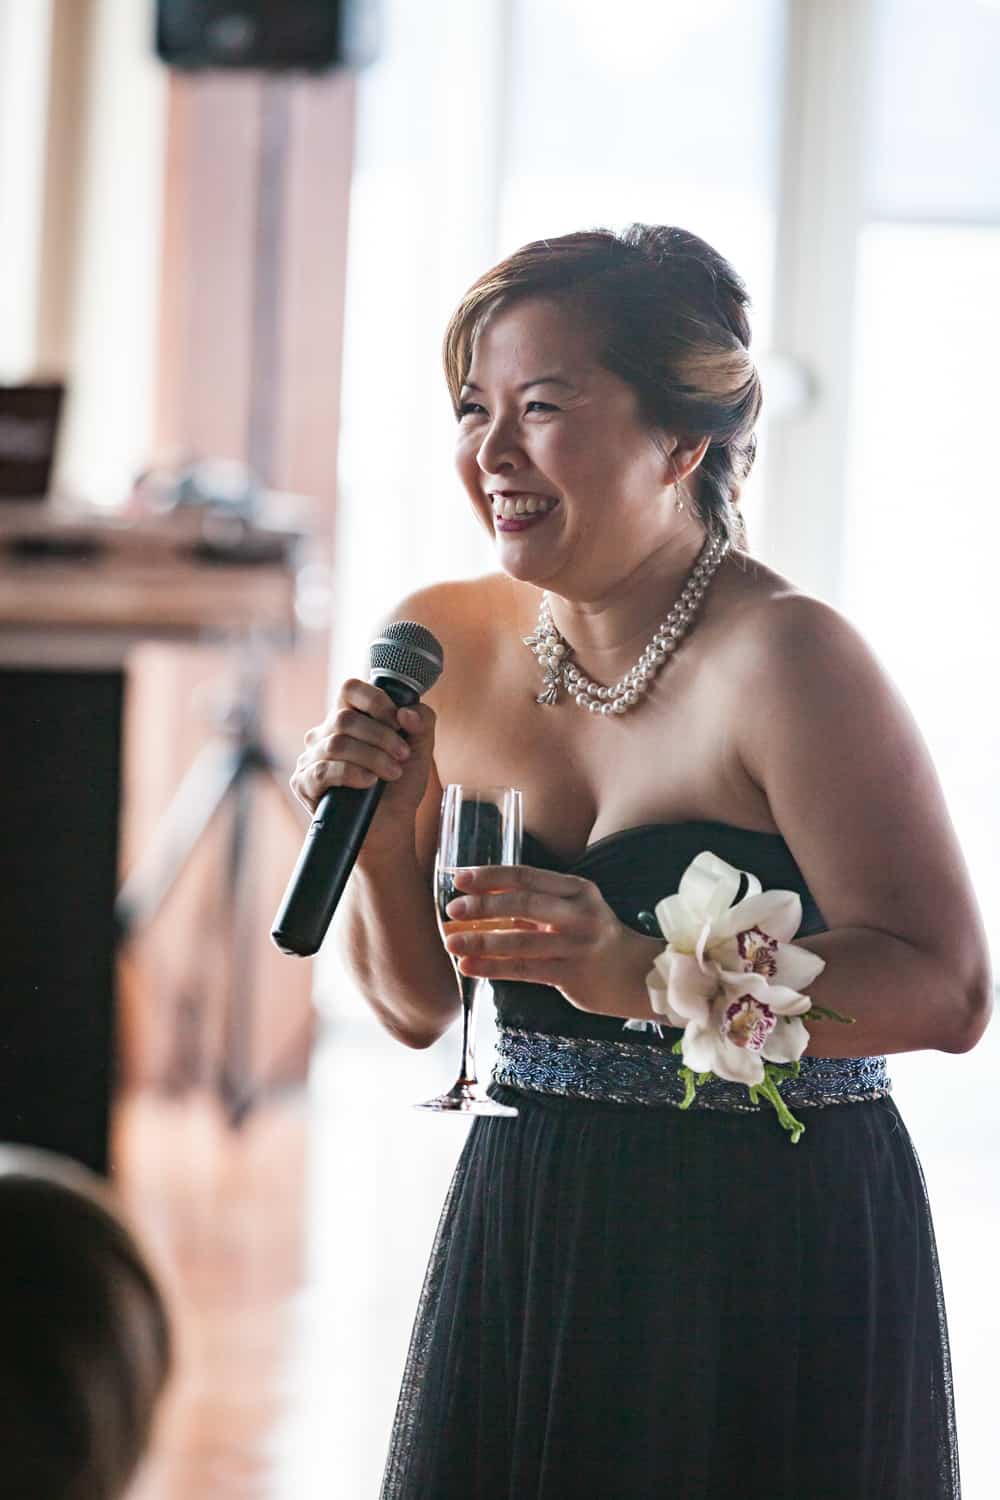 Maid of honor holding champagne glass and making speech into microphone